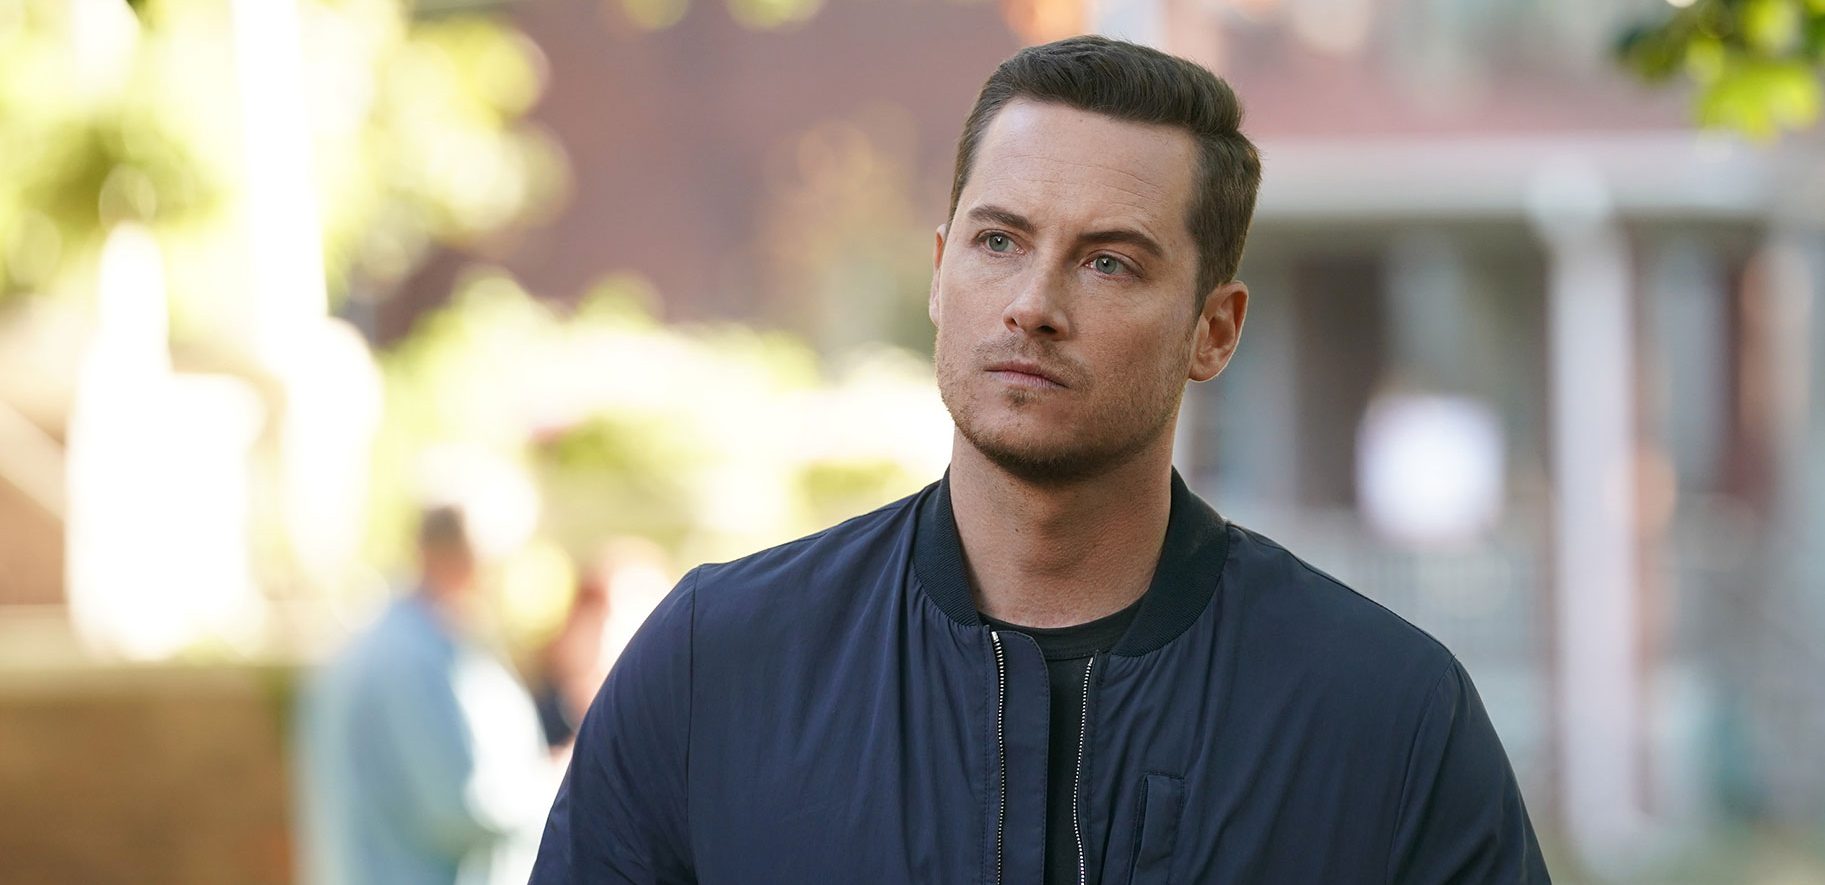 Did Jay Leave Chicago PD for Good? Will Jesse Lee Soffer Return to Chicago PD?